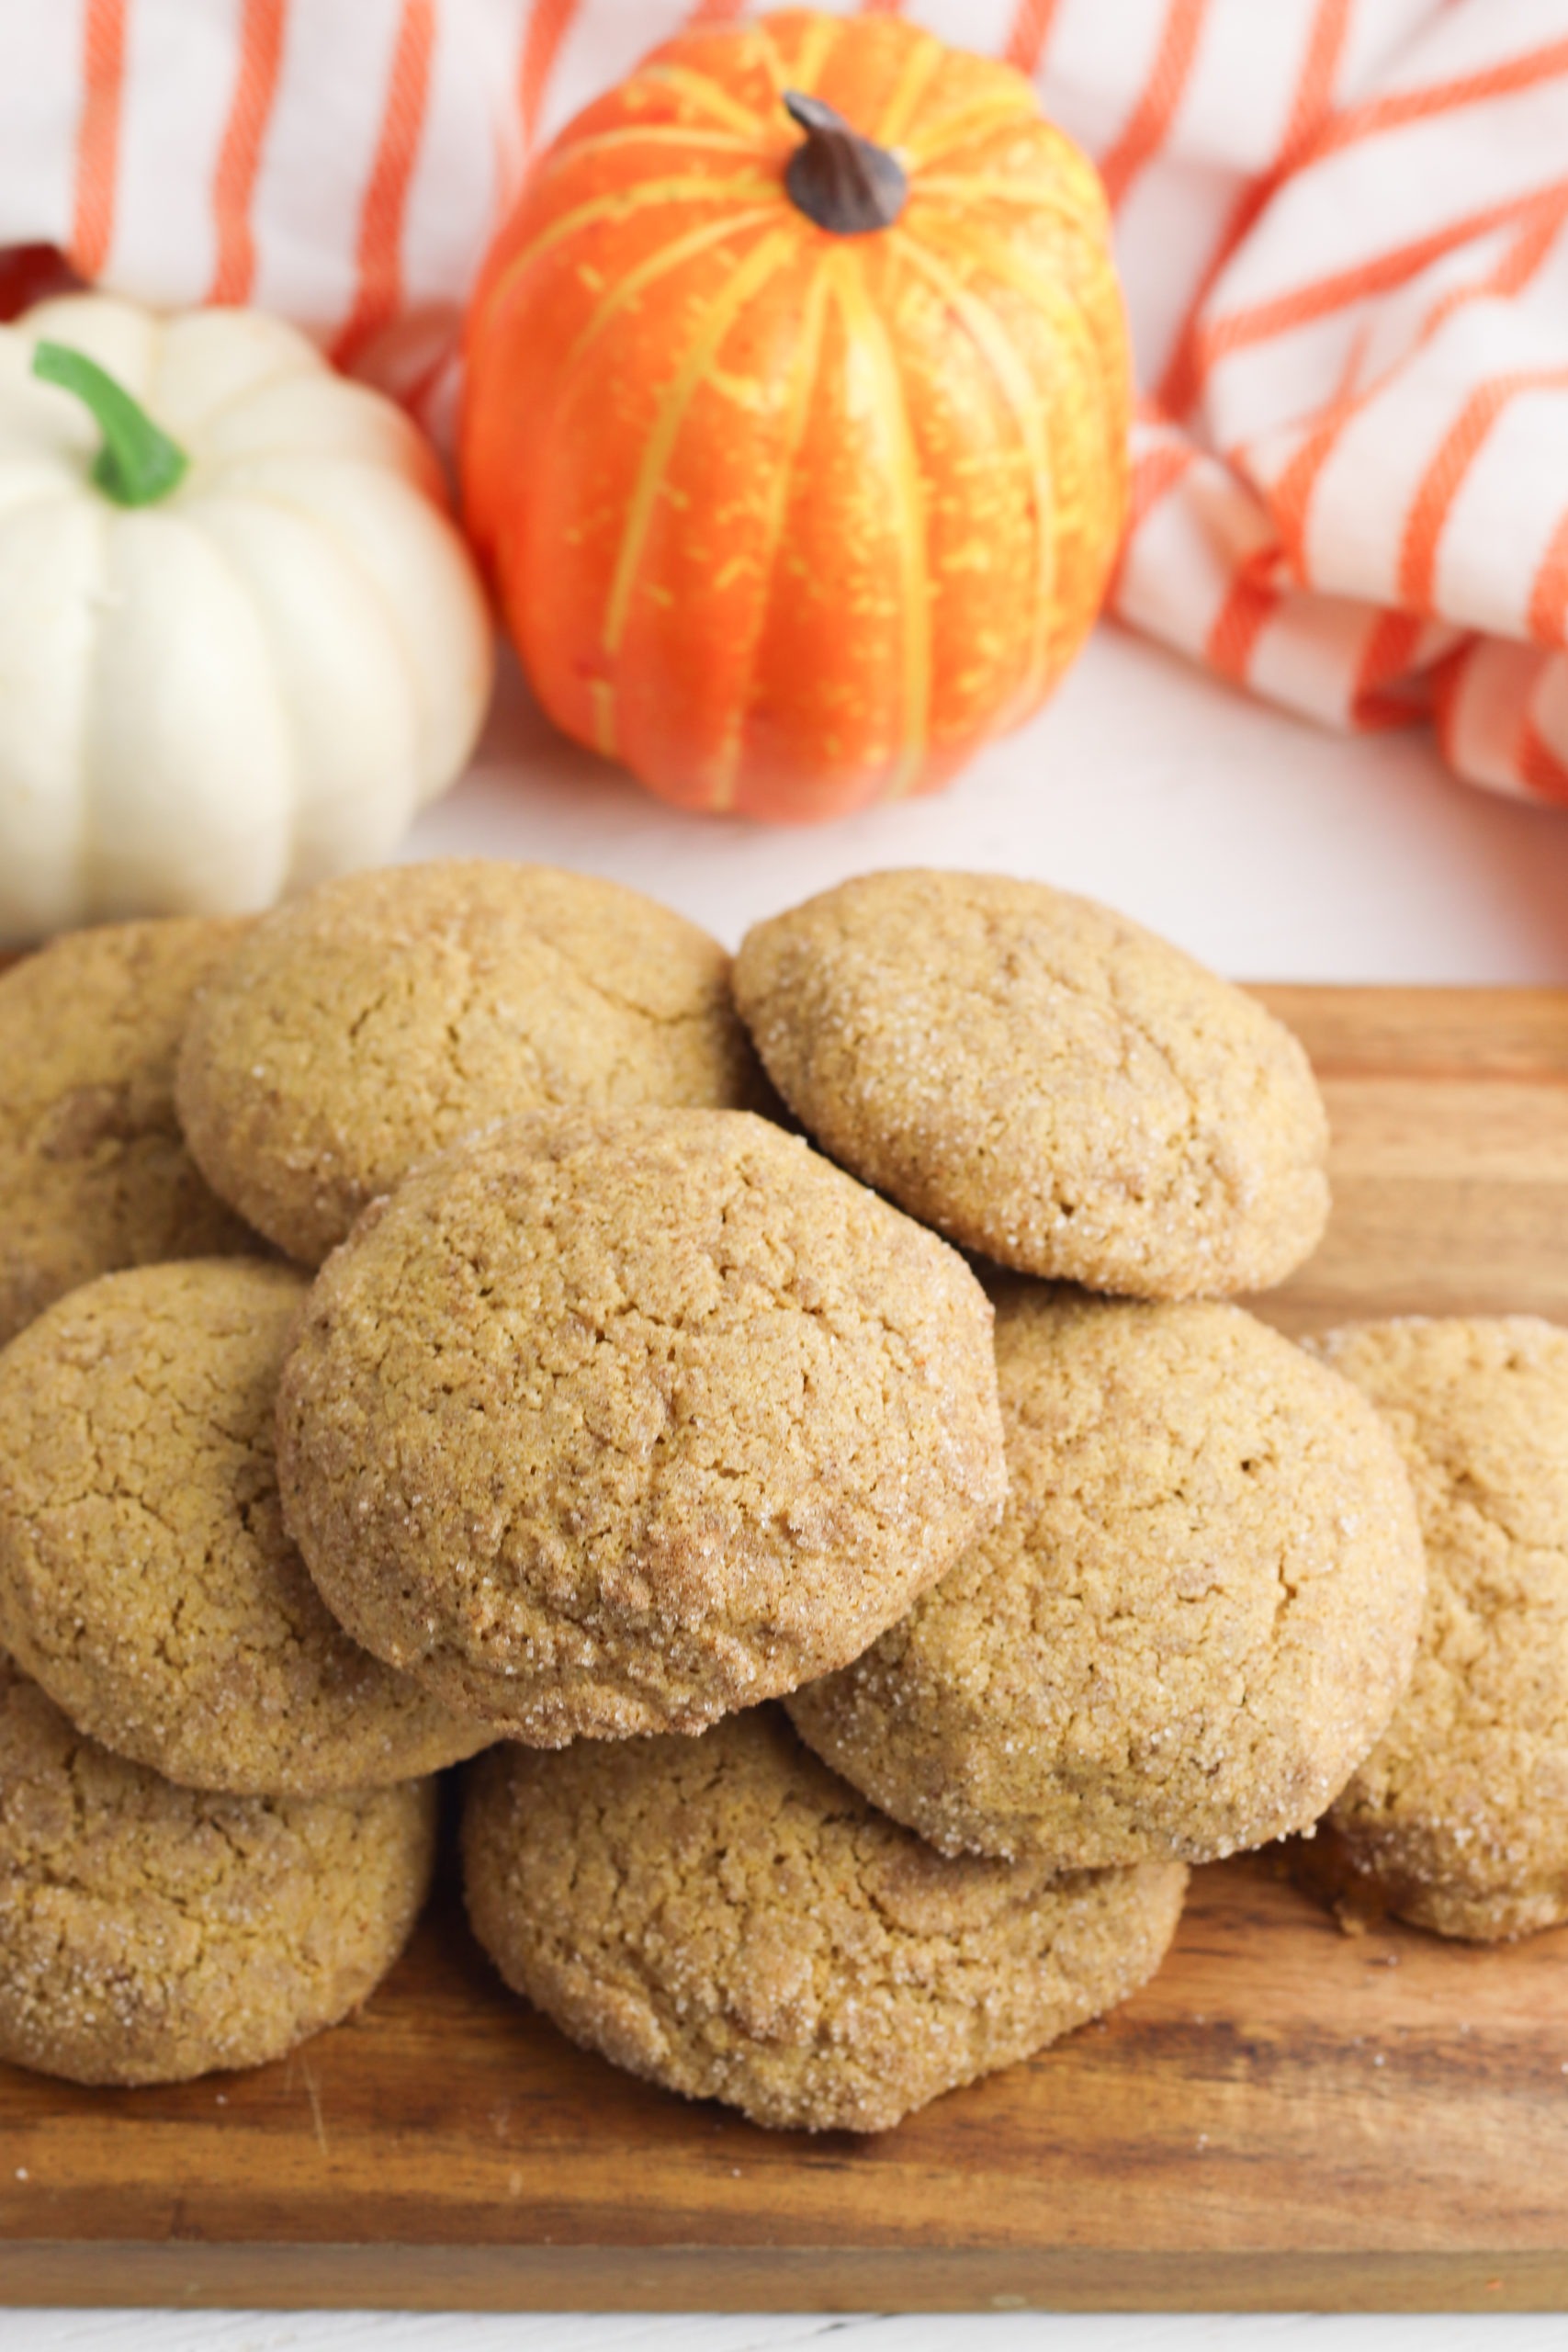 Pumpkin Spice cookies with pumpkins on the side with an orange and white stripped napkin.